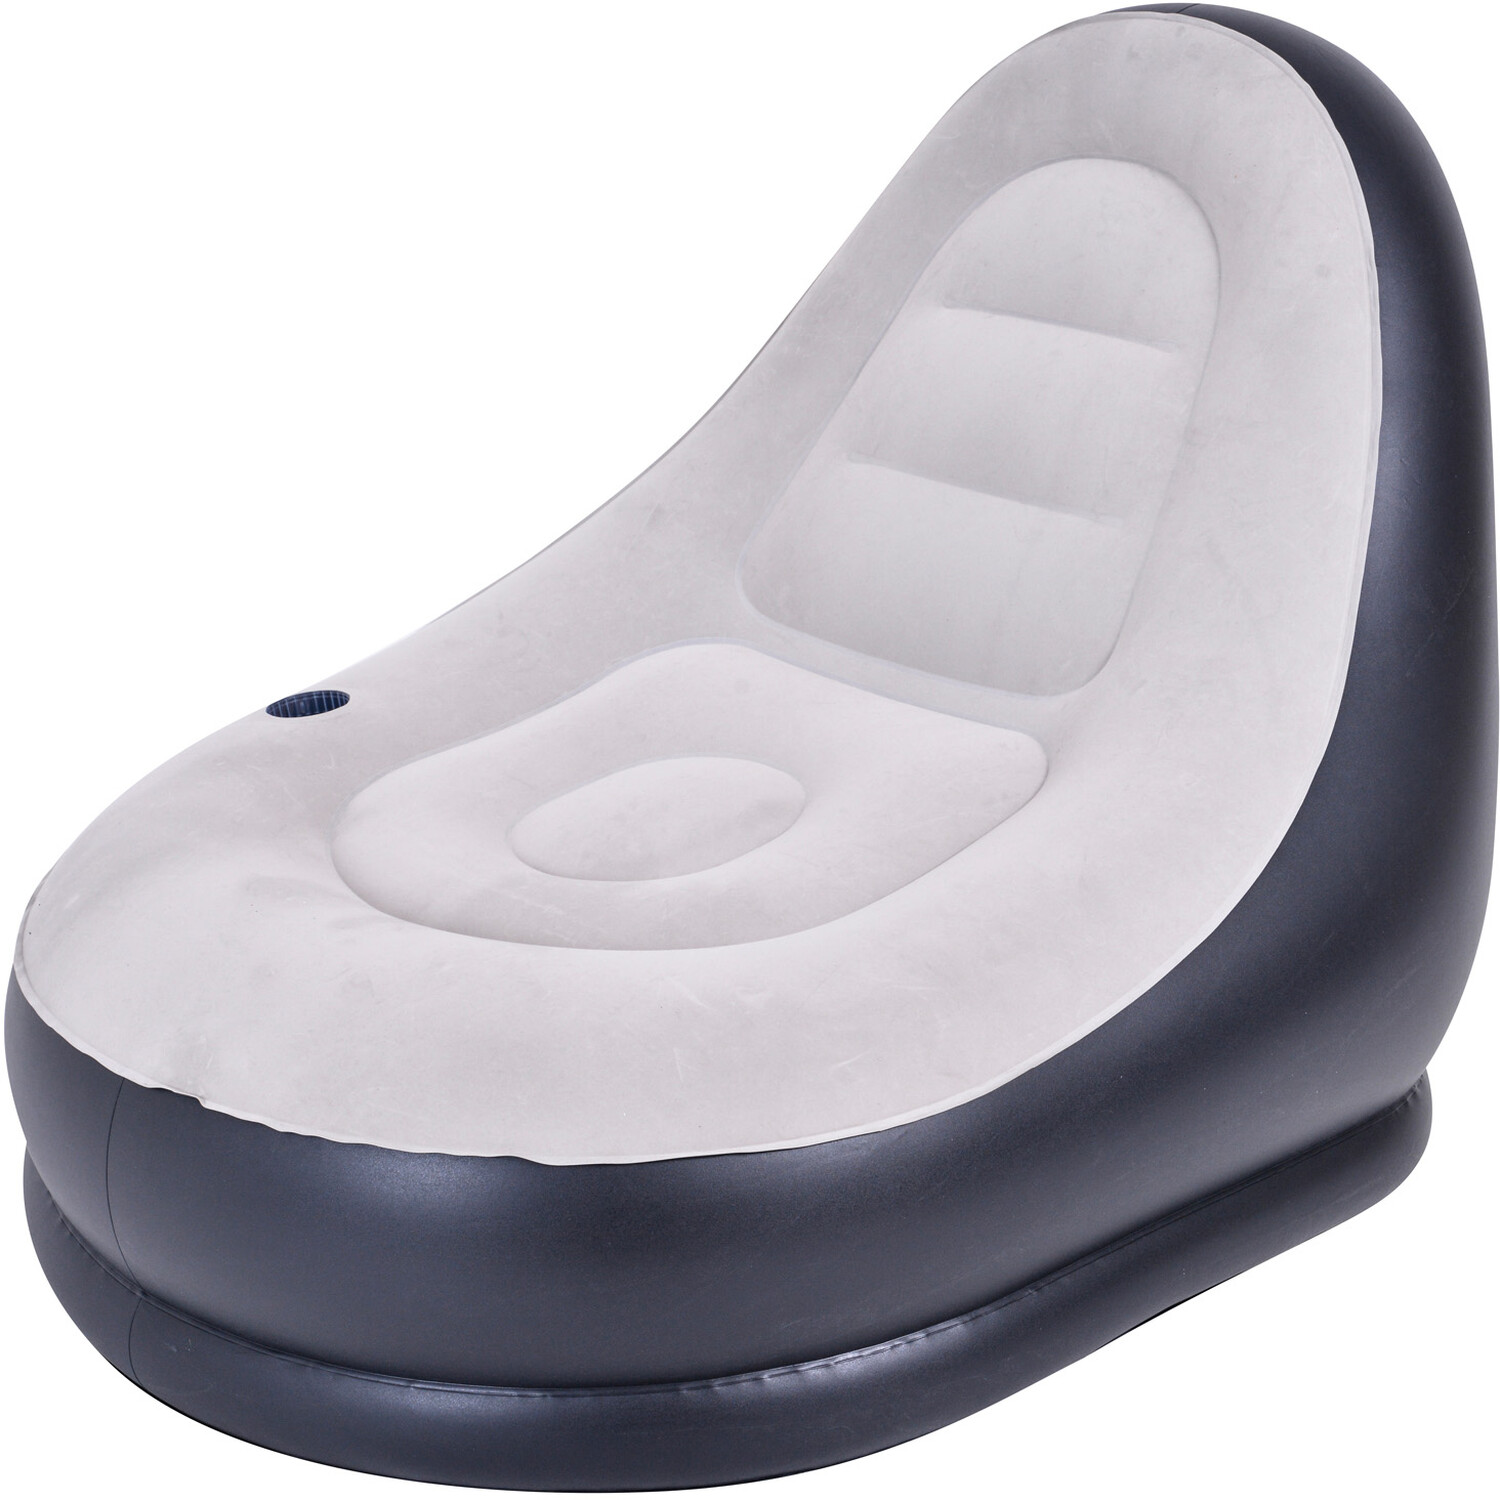 Avenli Black and White Inflatable Vinyl Lounger with Stool Image 1